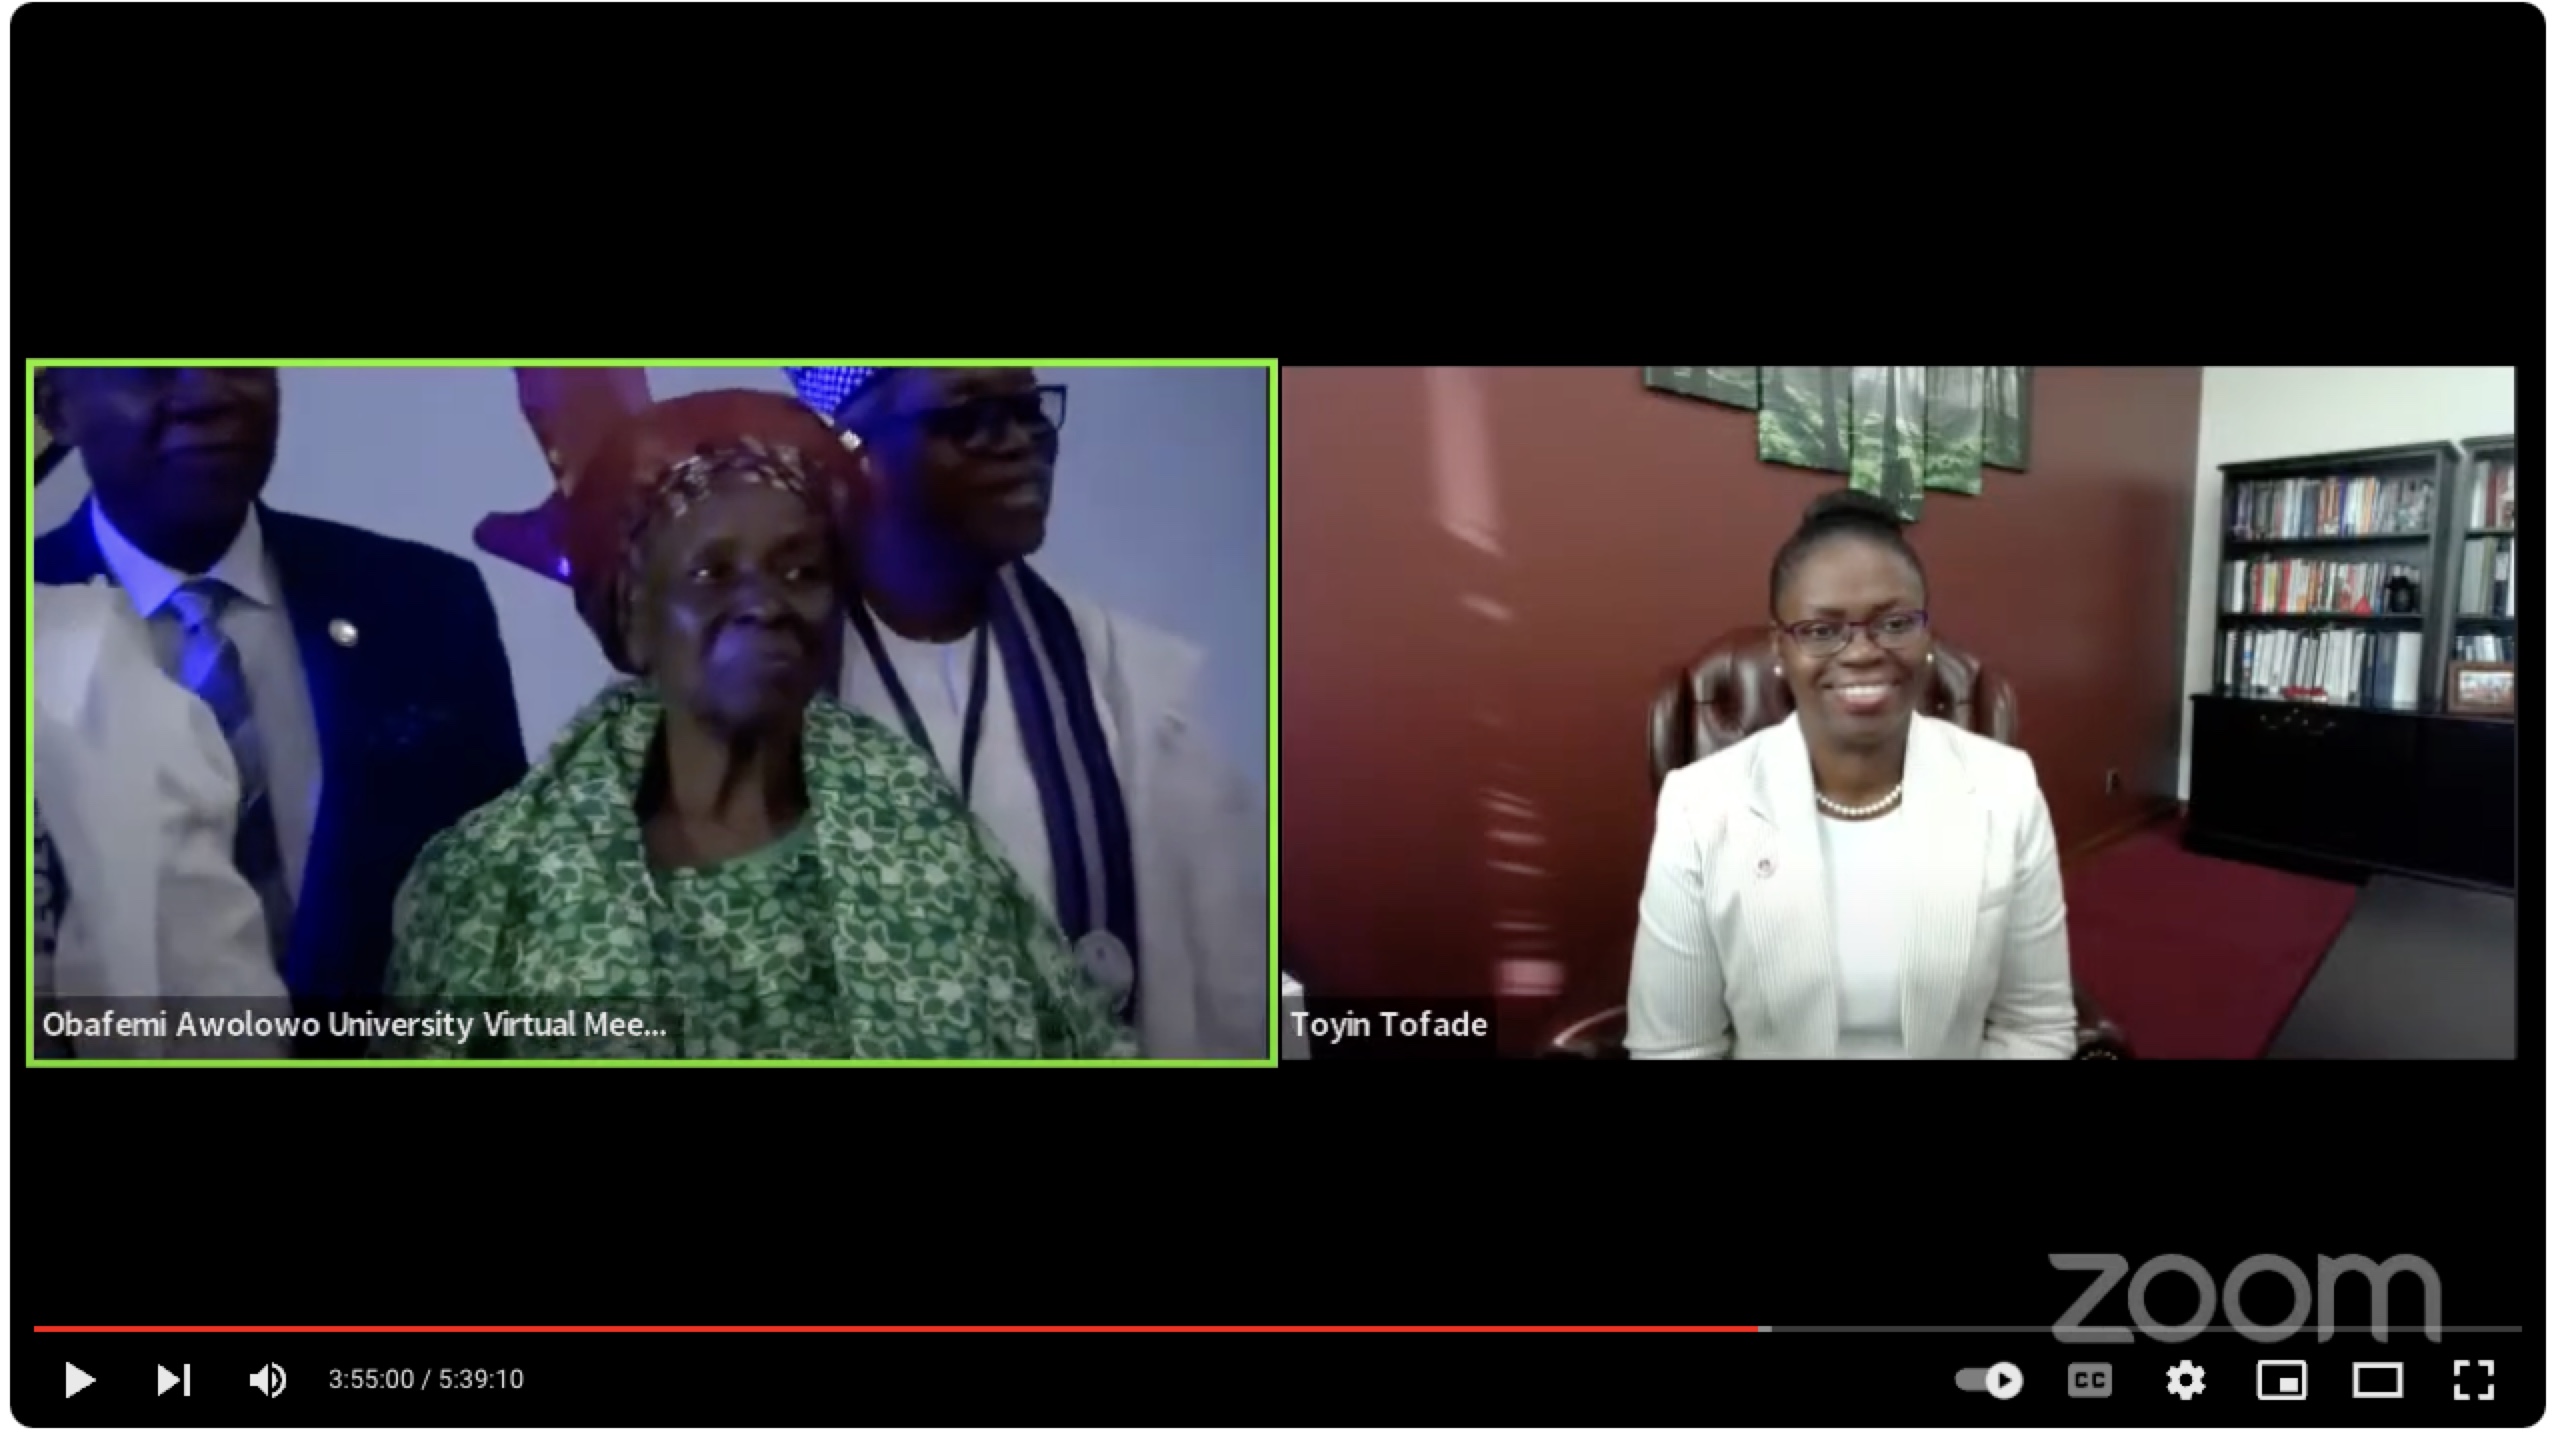 Zoom screen shot: President Tofade on right, her mother receiving award on left